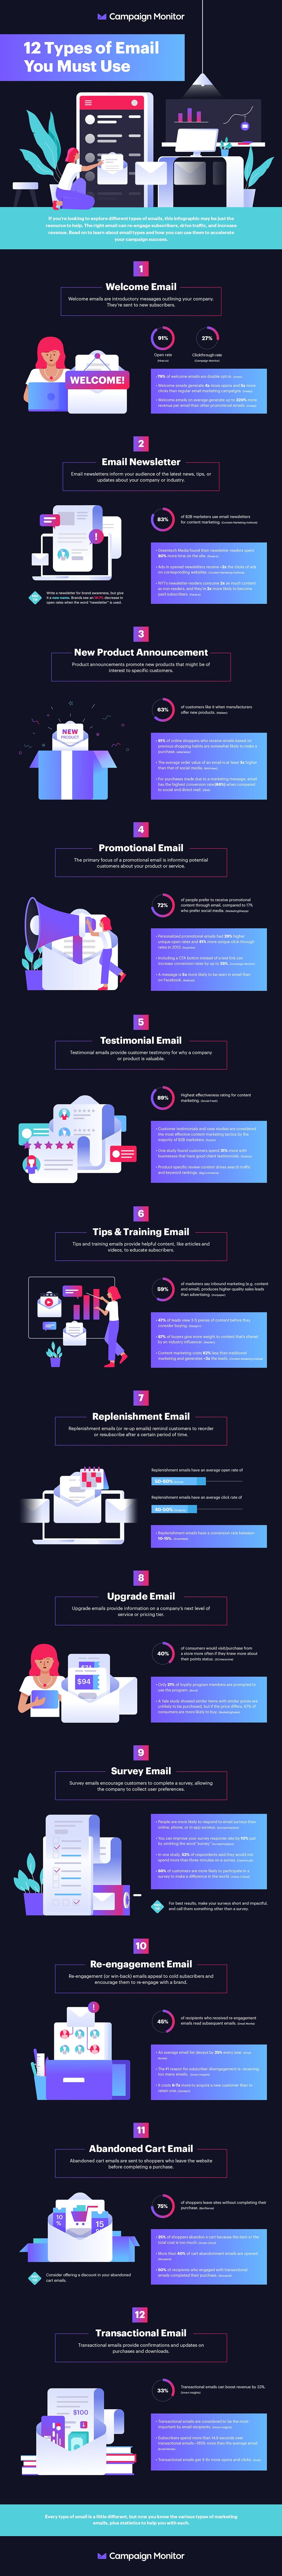 Every type of email infographic from Campaign Monitor